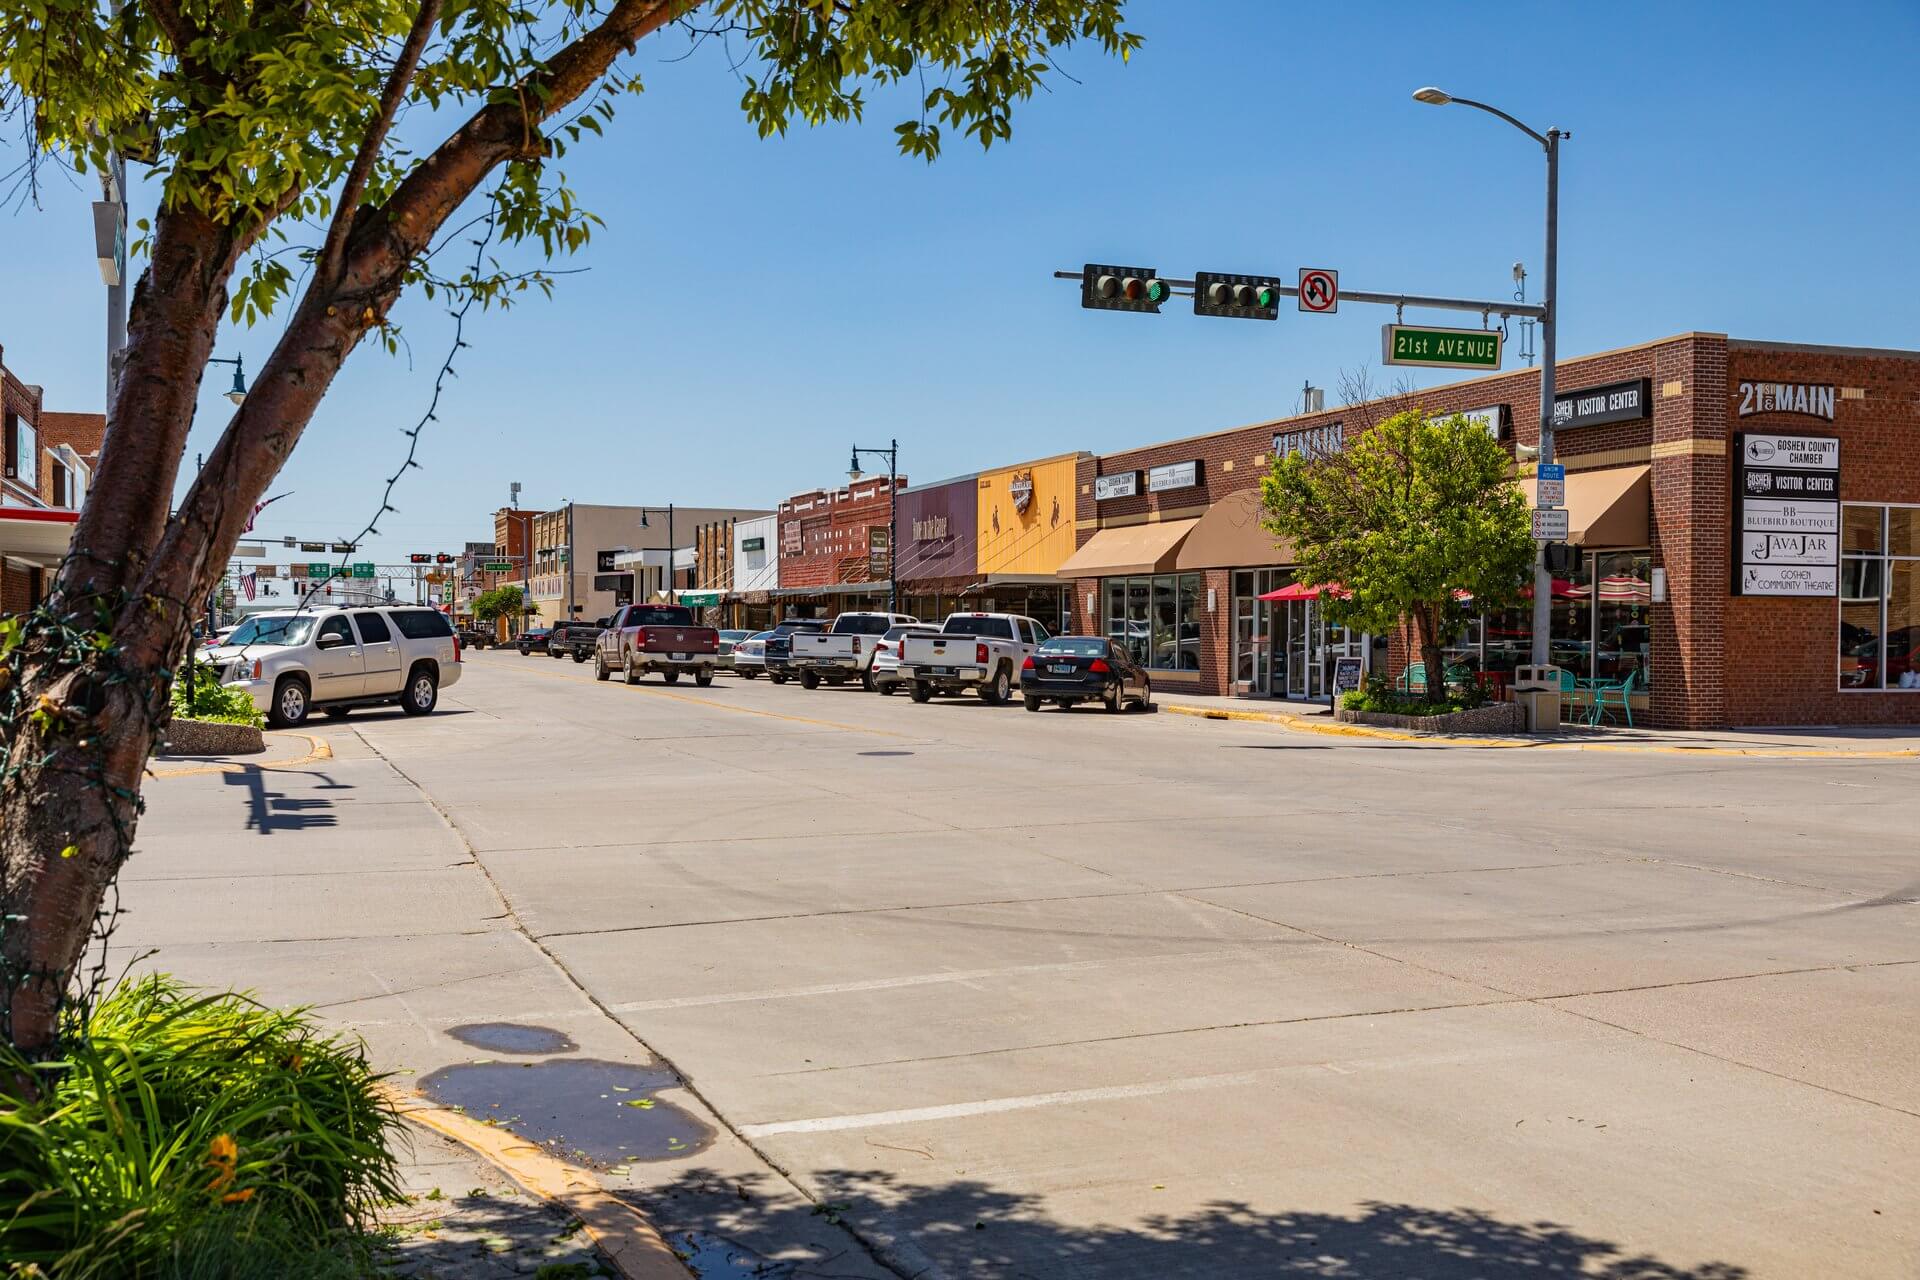 A view of the main street in Torrington, Wyoming where a building has a sign for 21st & Main next to the street sign for 21st Avenue as a tree leans to the right above the street on the left. 